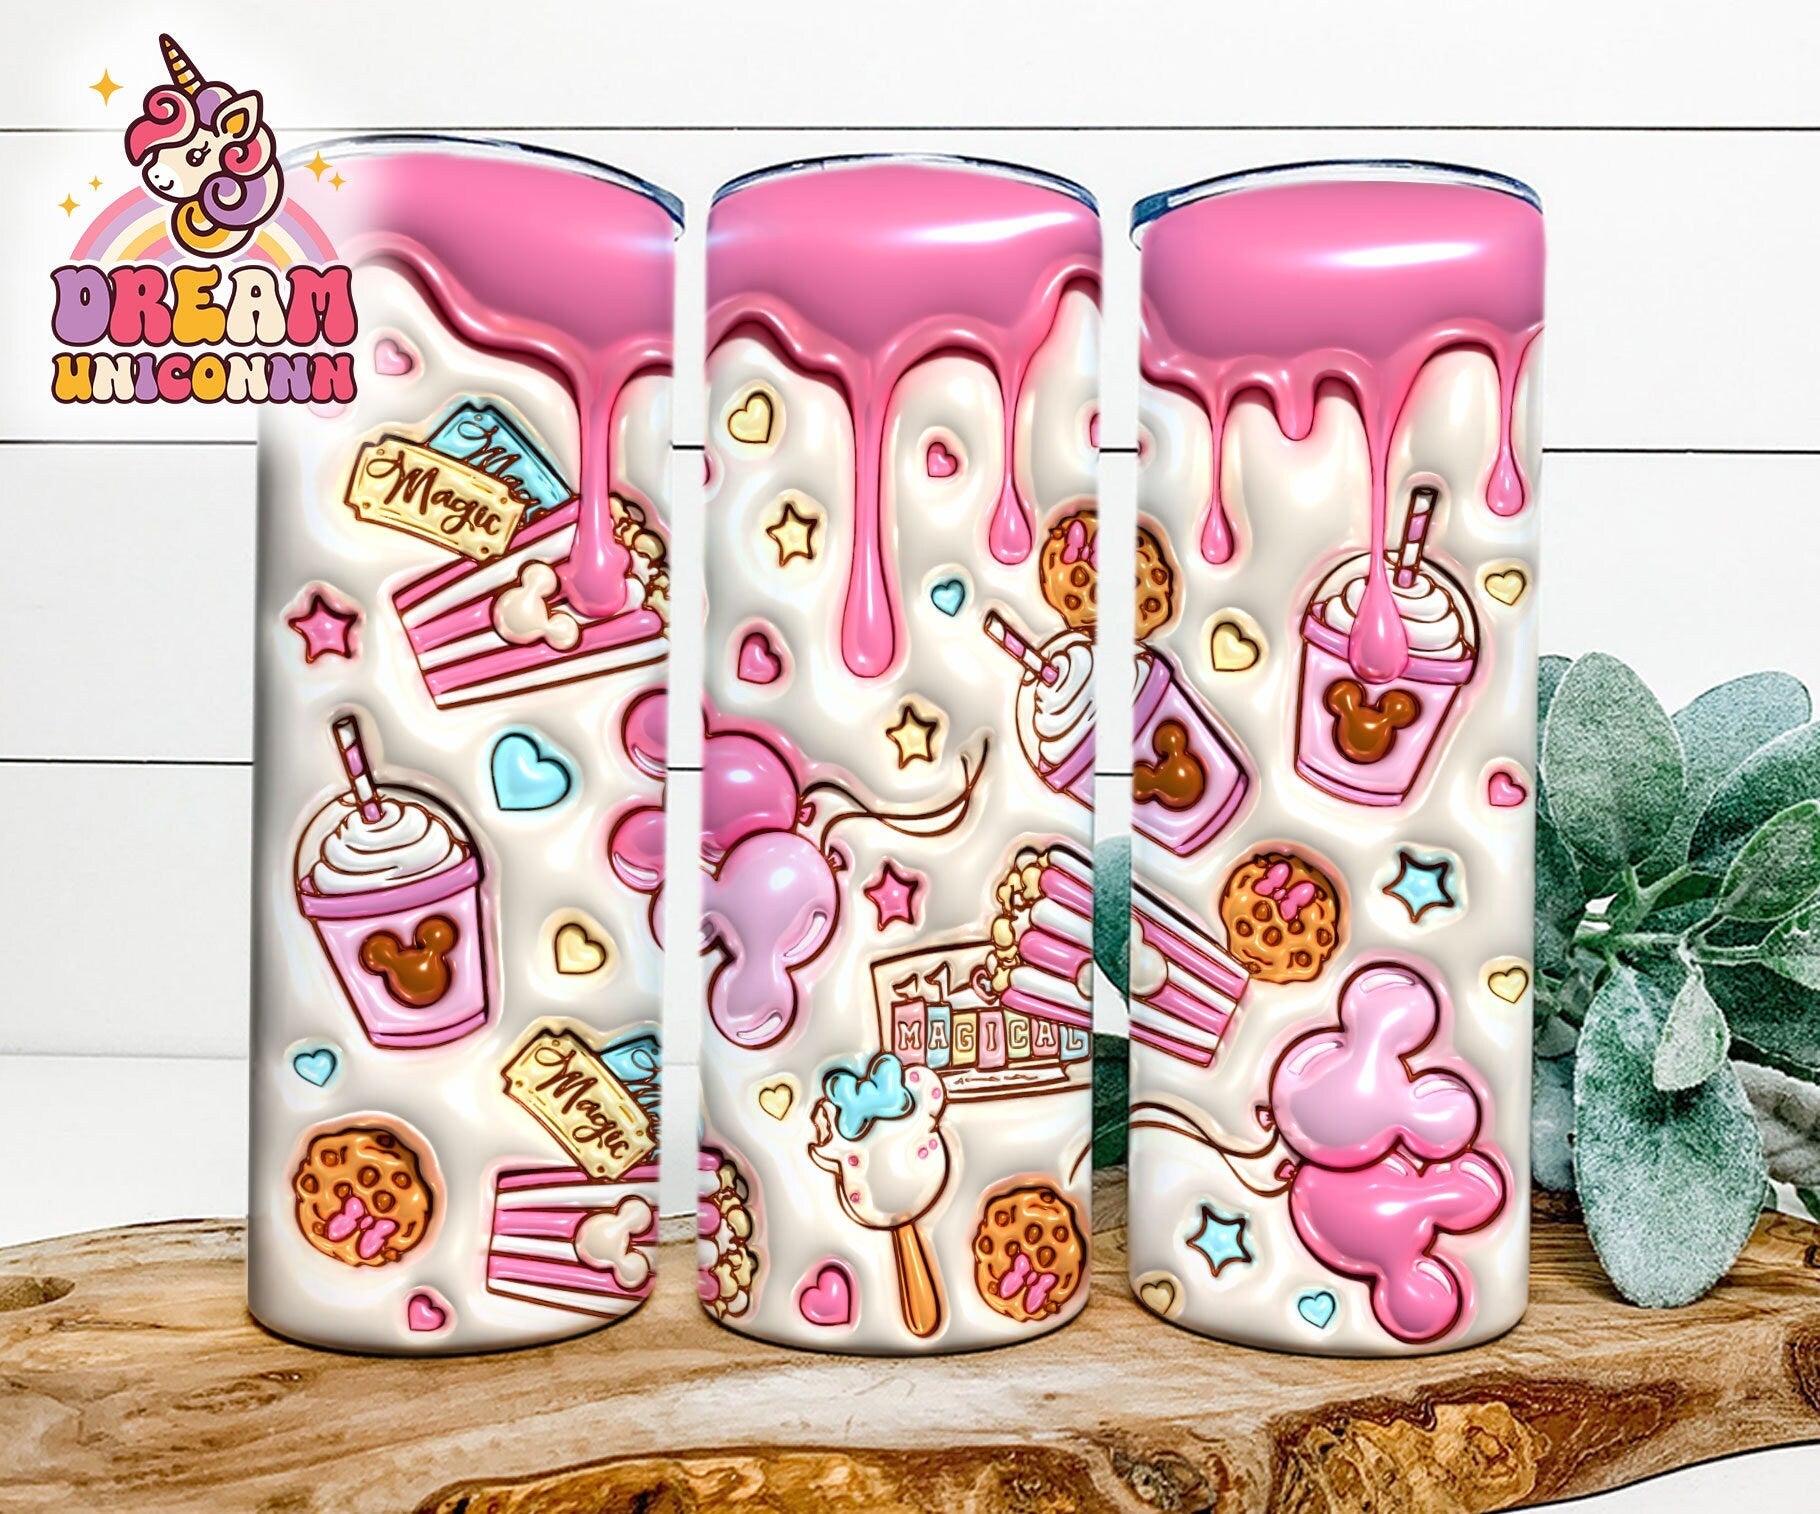 3D Inflated Snack 20 Oz Skinny Tumbler, Park Snacks Png, Snackgoal Sublimation, Magical Snack, Drinks And Foods Wrap - VartDigitals